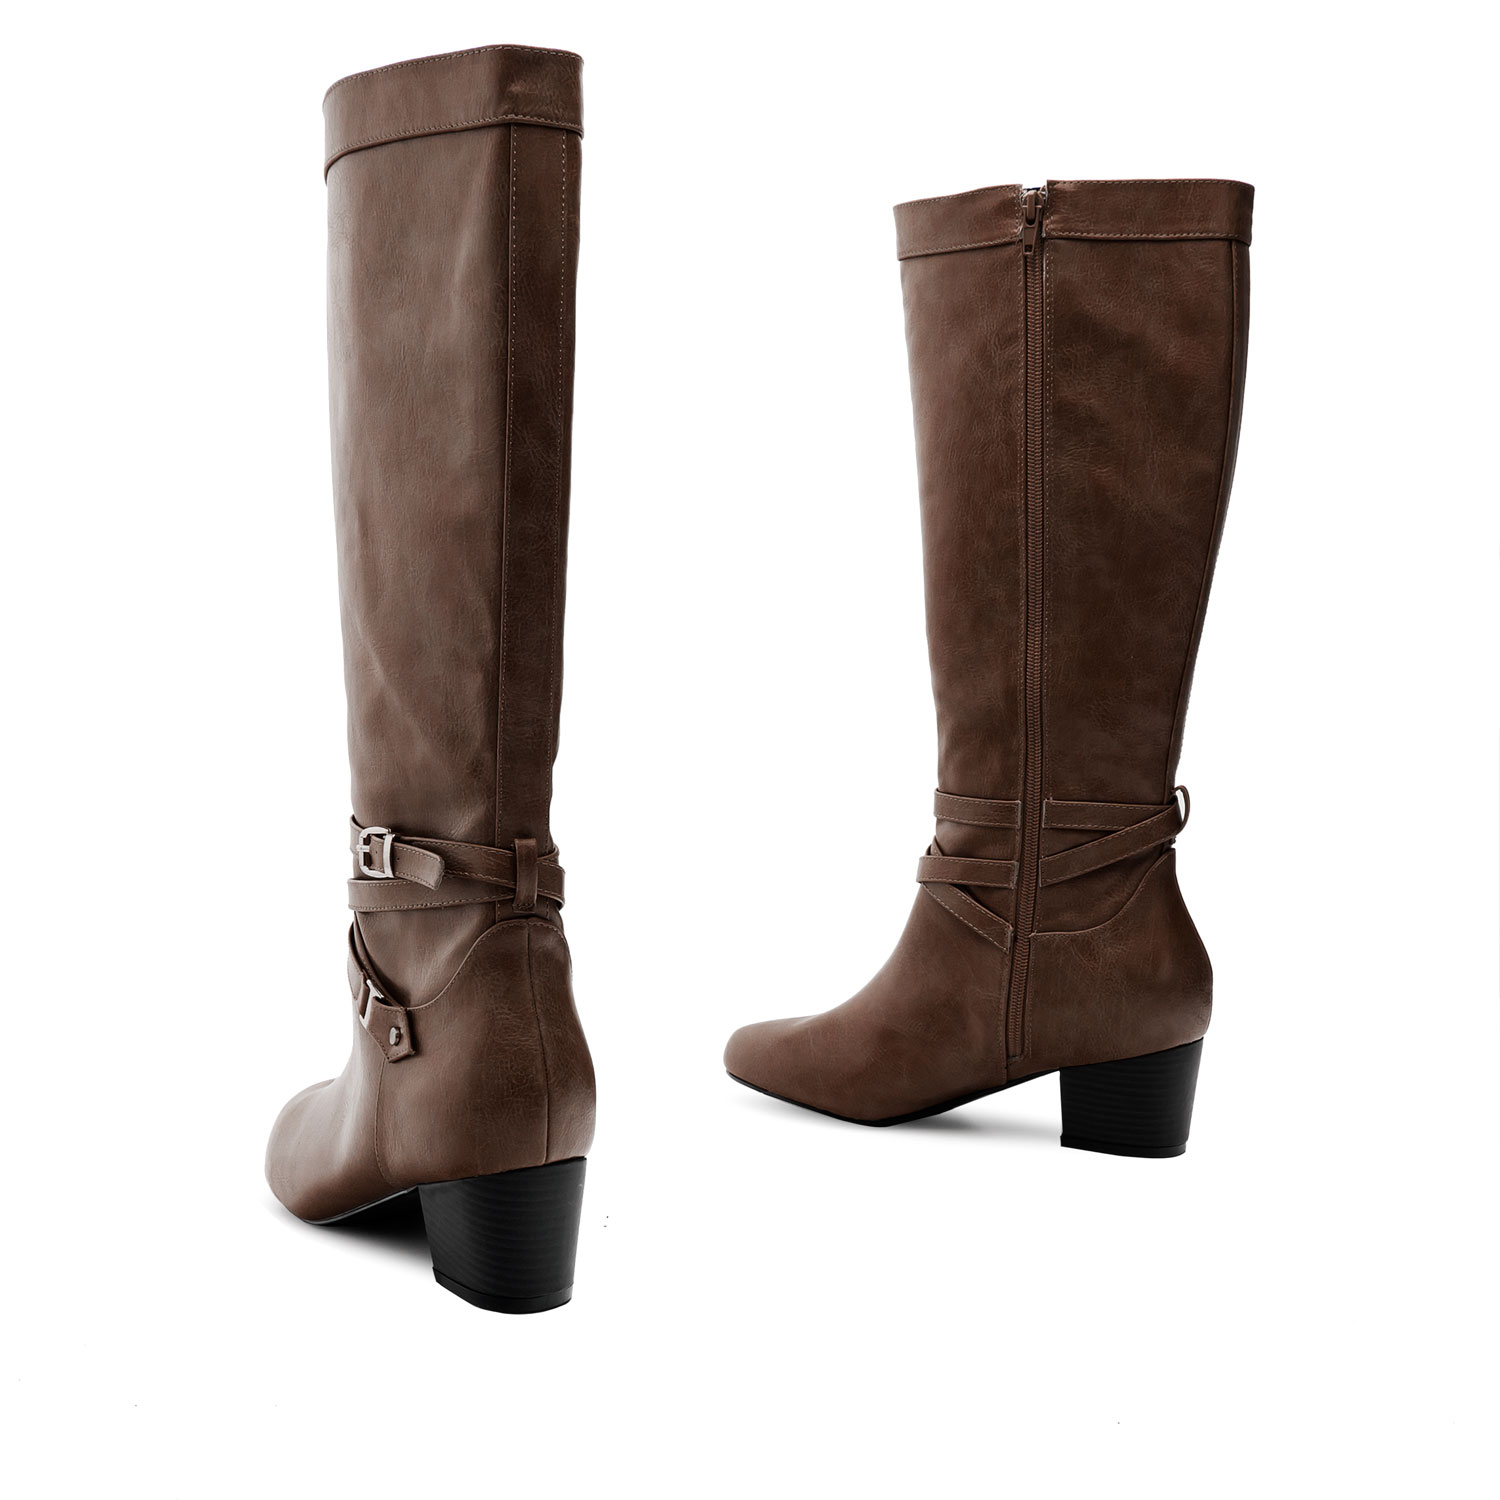 2-Buckled Boots in Brown Faux Leather 